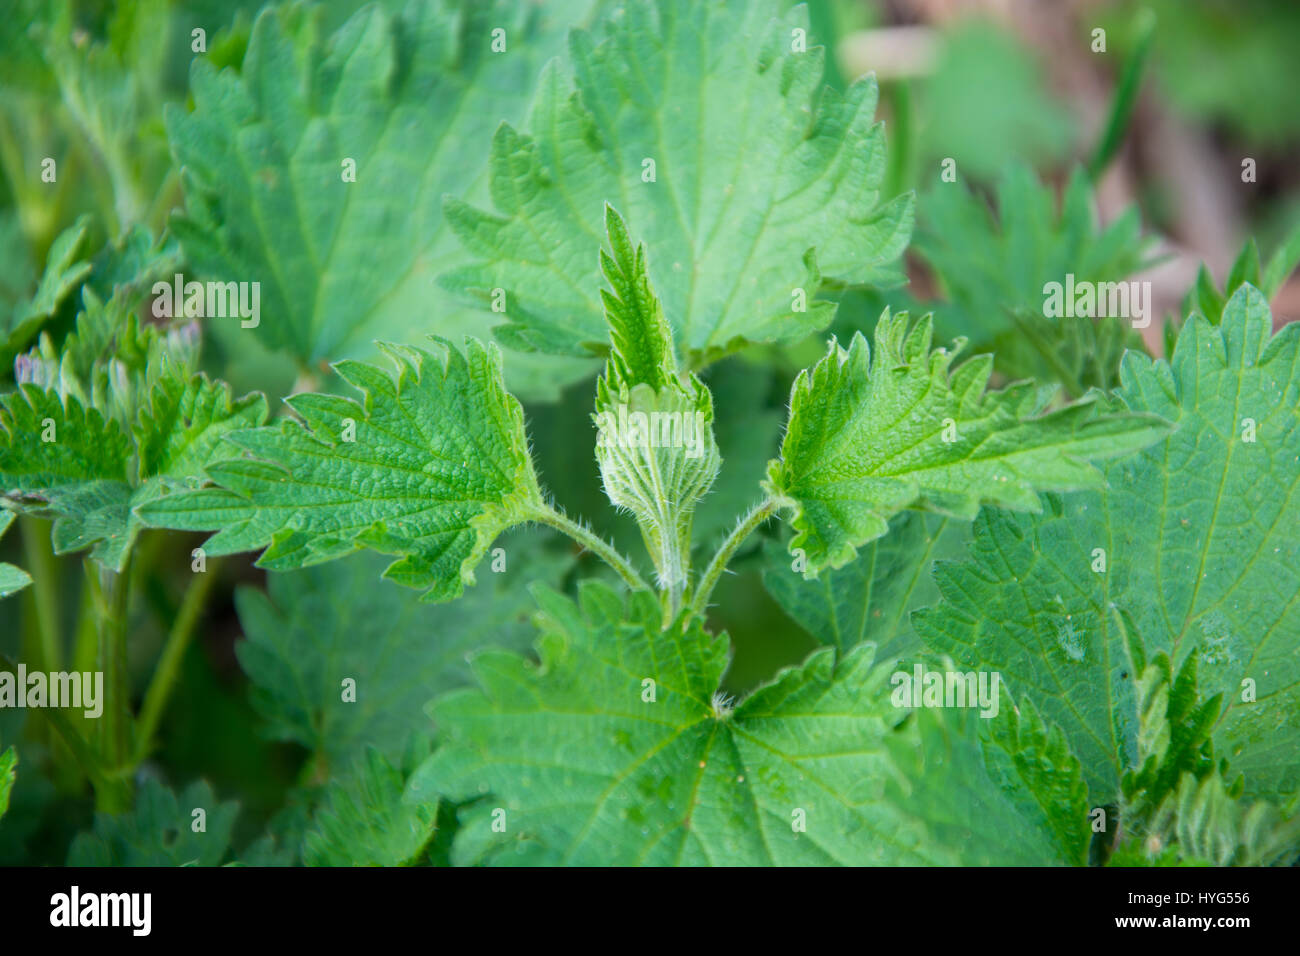 Nettles (urtica) natural medicinal green wild plant, healthy herbal Stock Photo